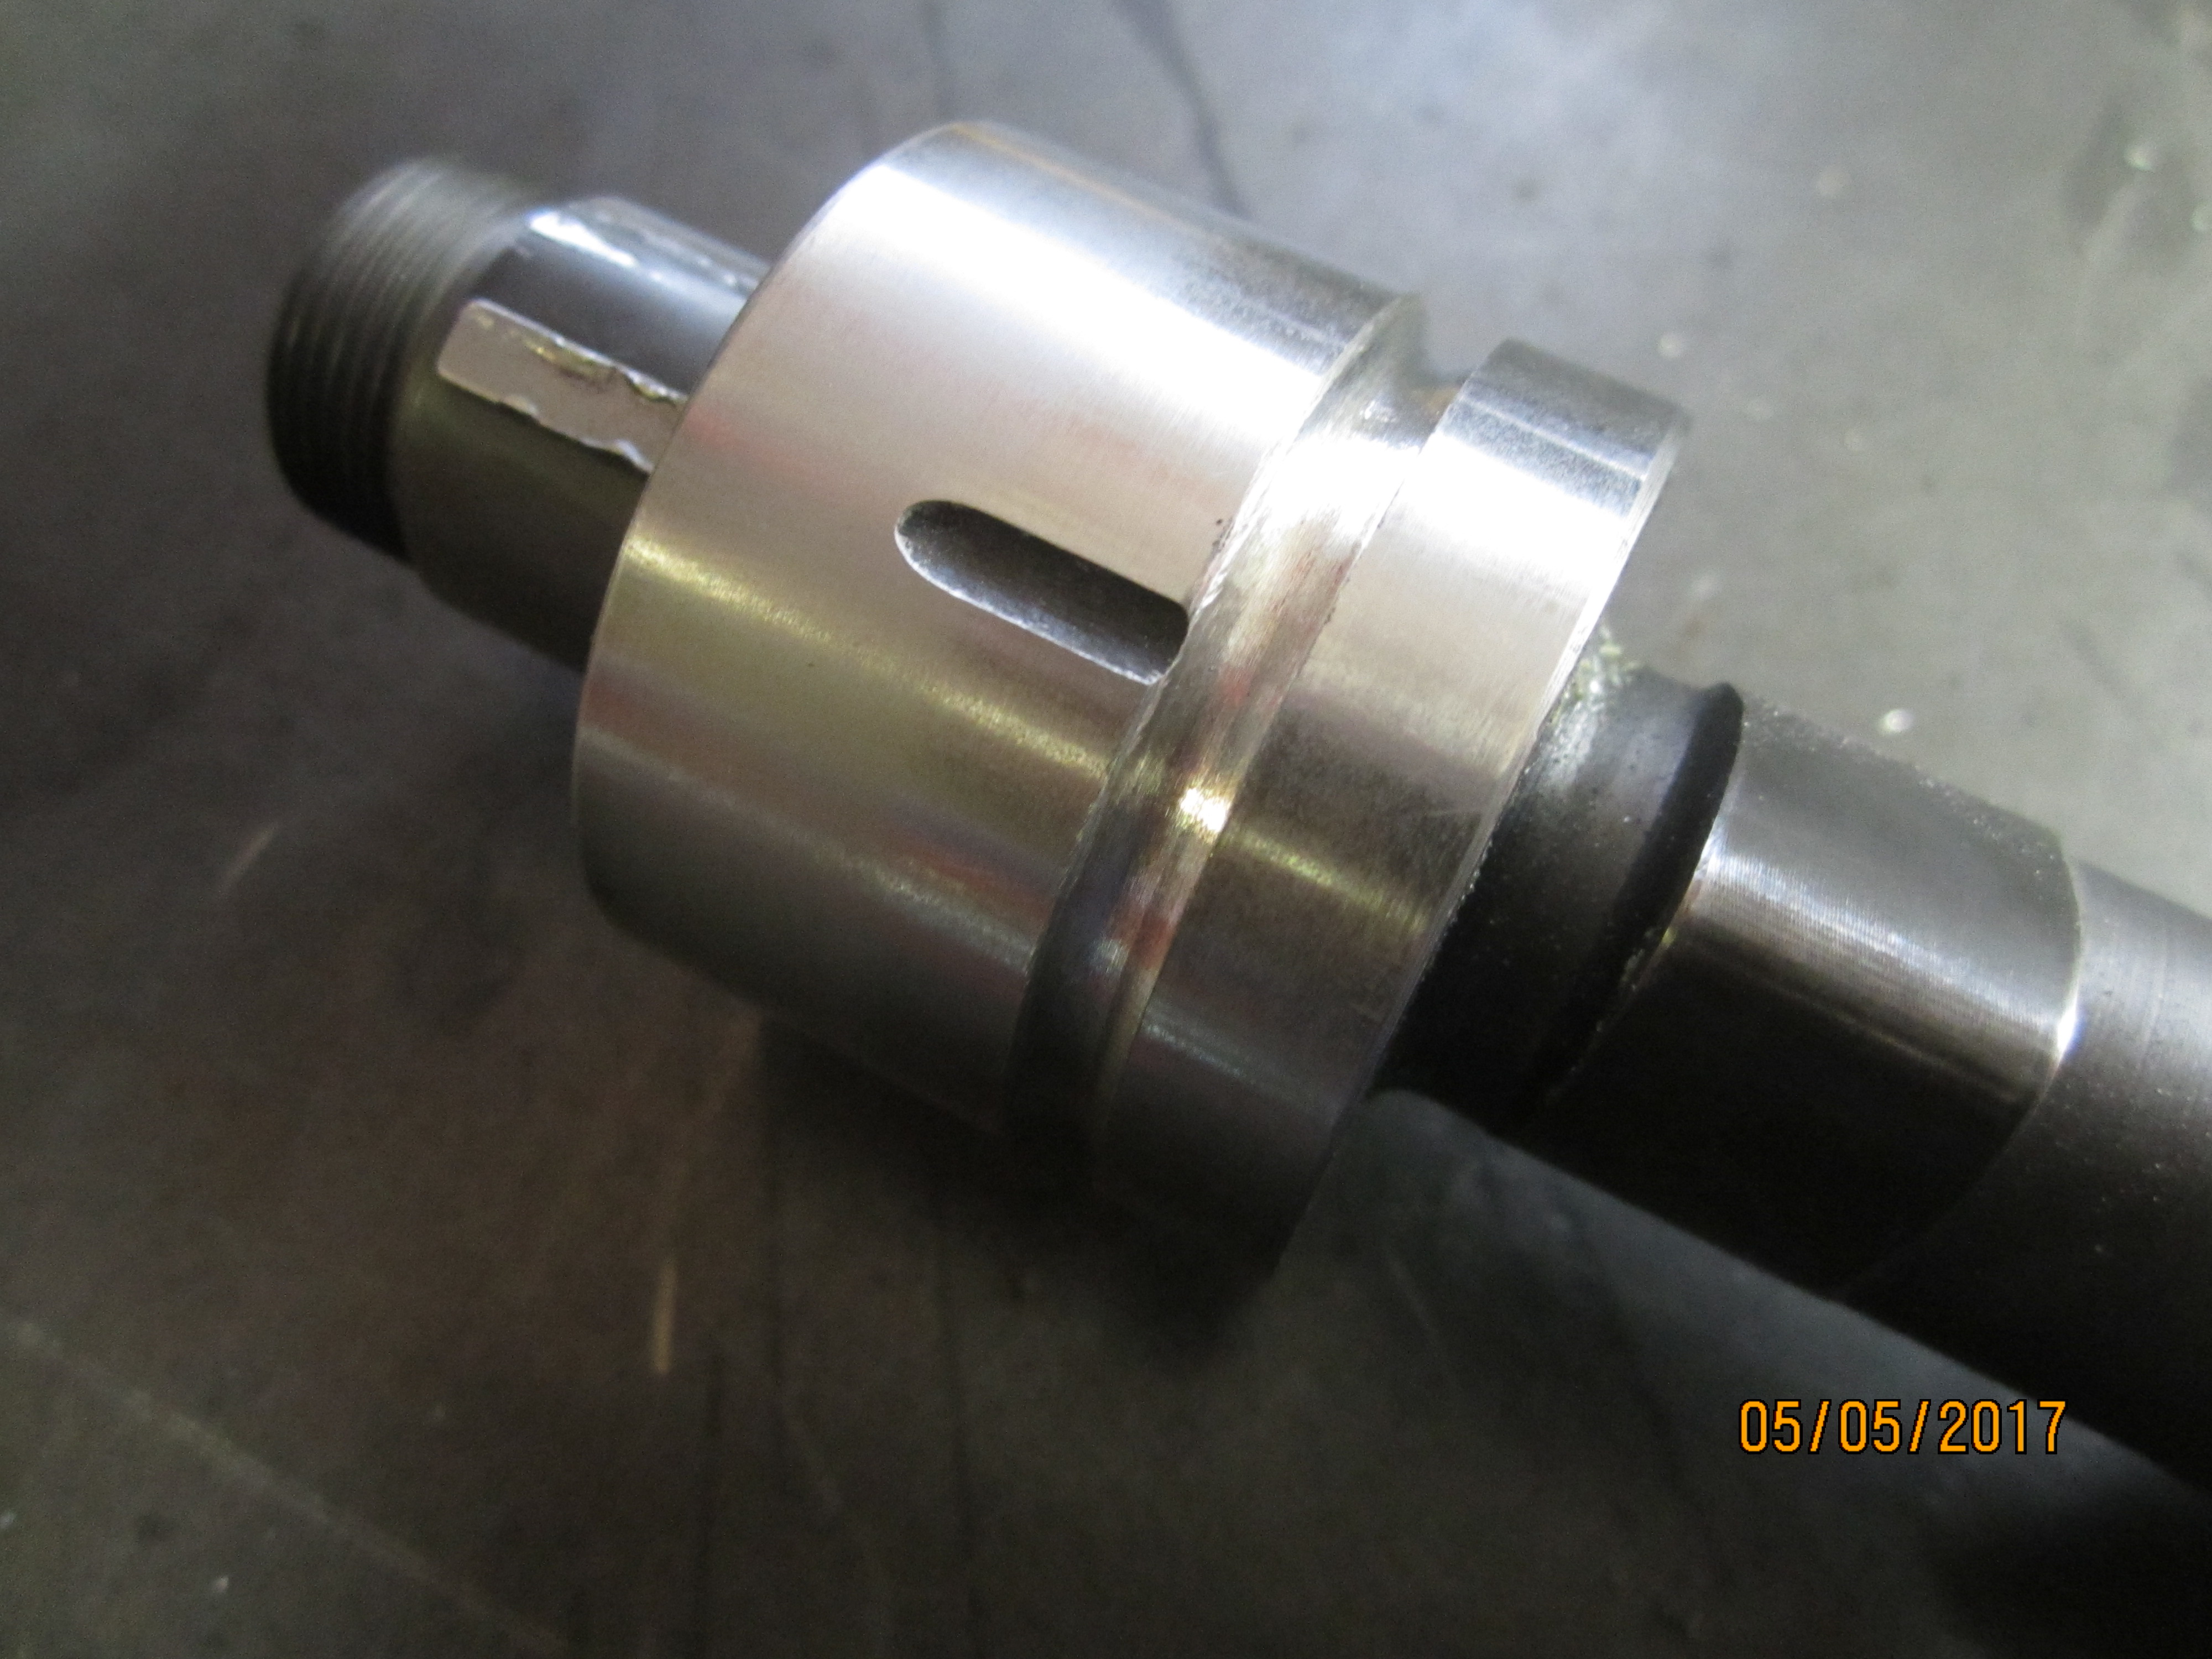 Oil channel work and driveshafts